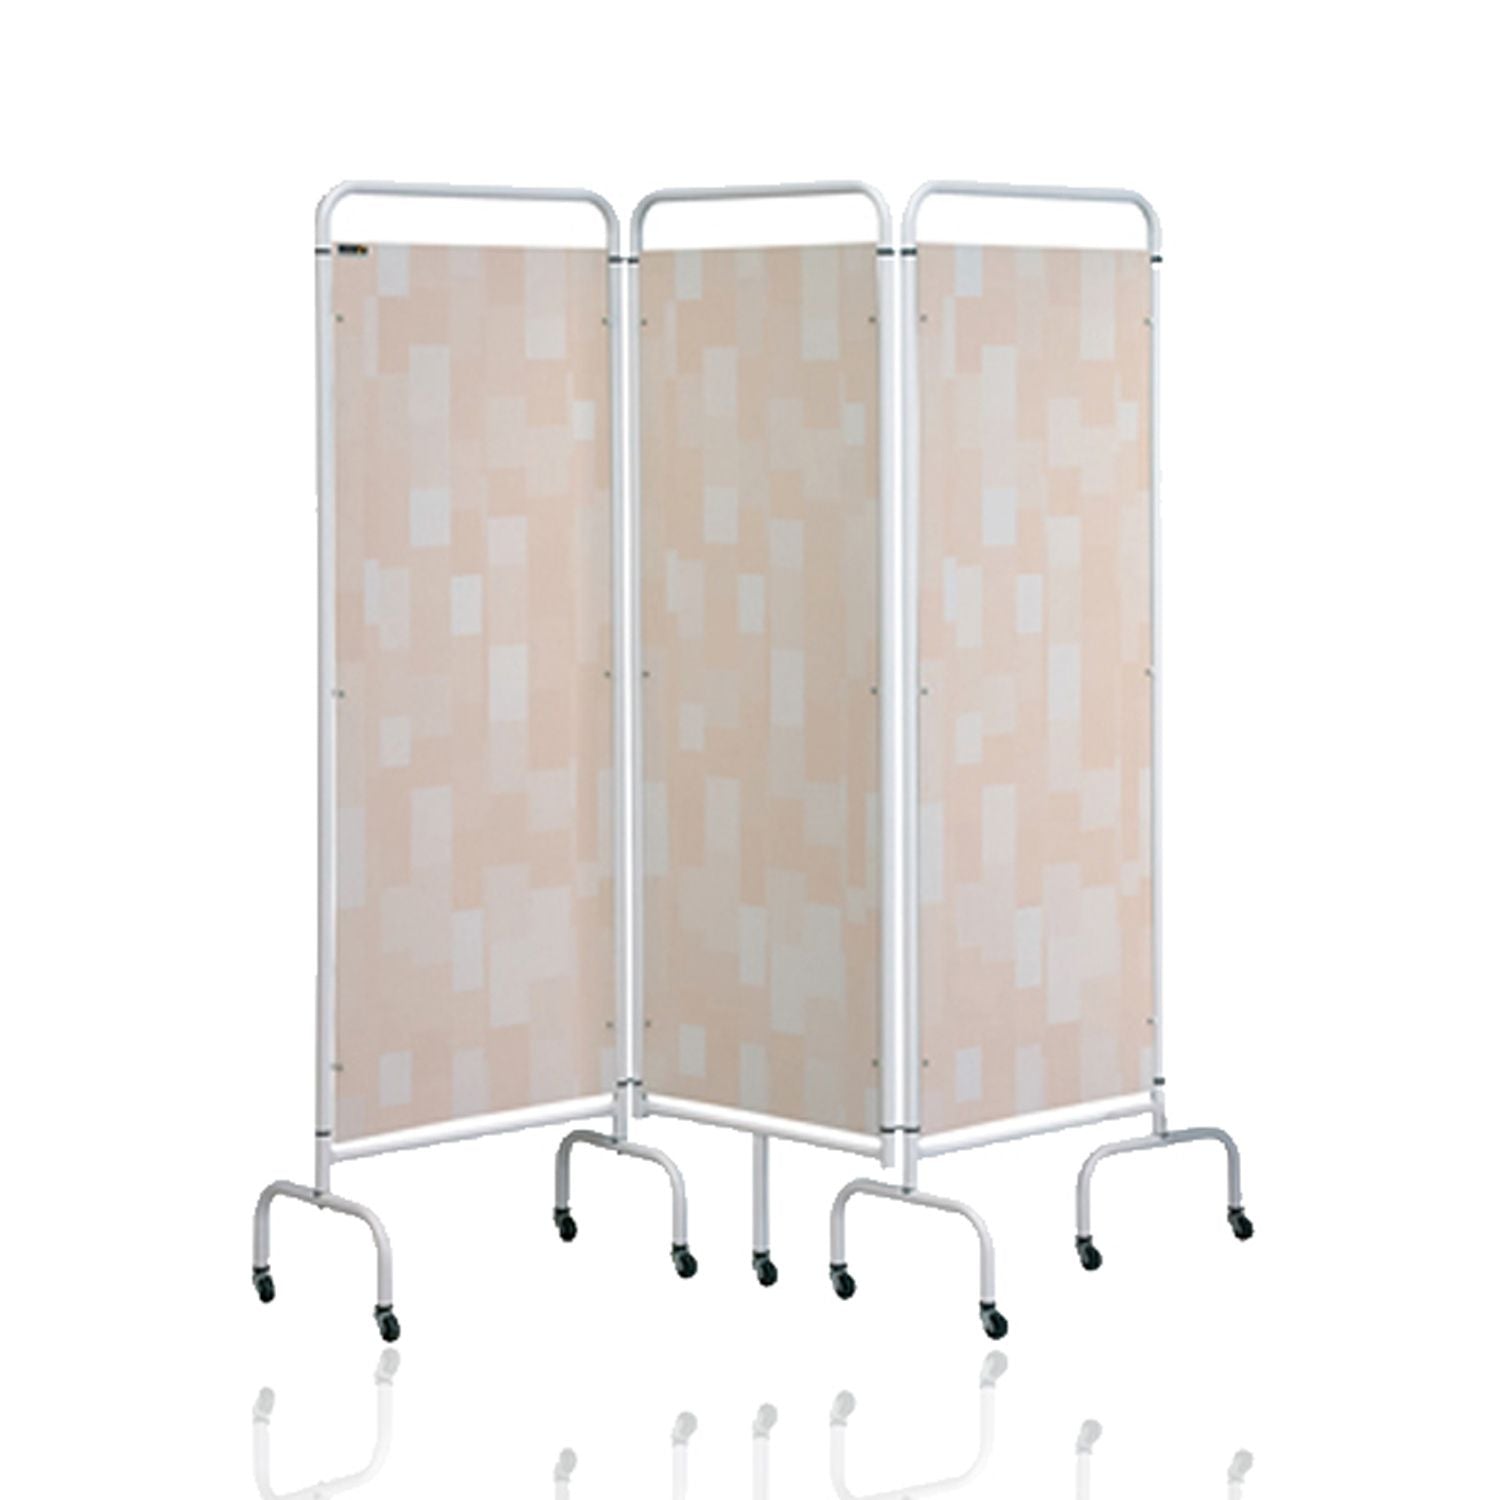 Sunflower 3 Section Mobile Folding Screen with Hygienic Disposable Curtains (4)